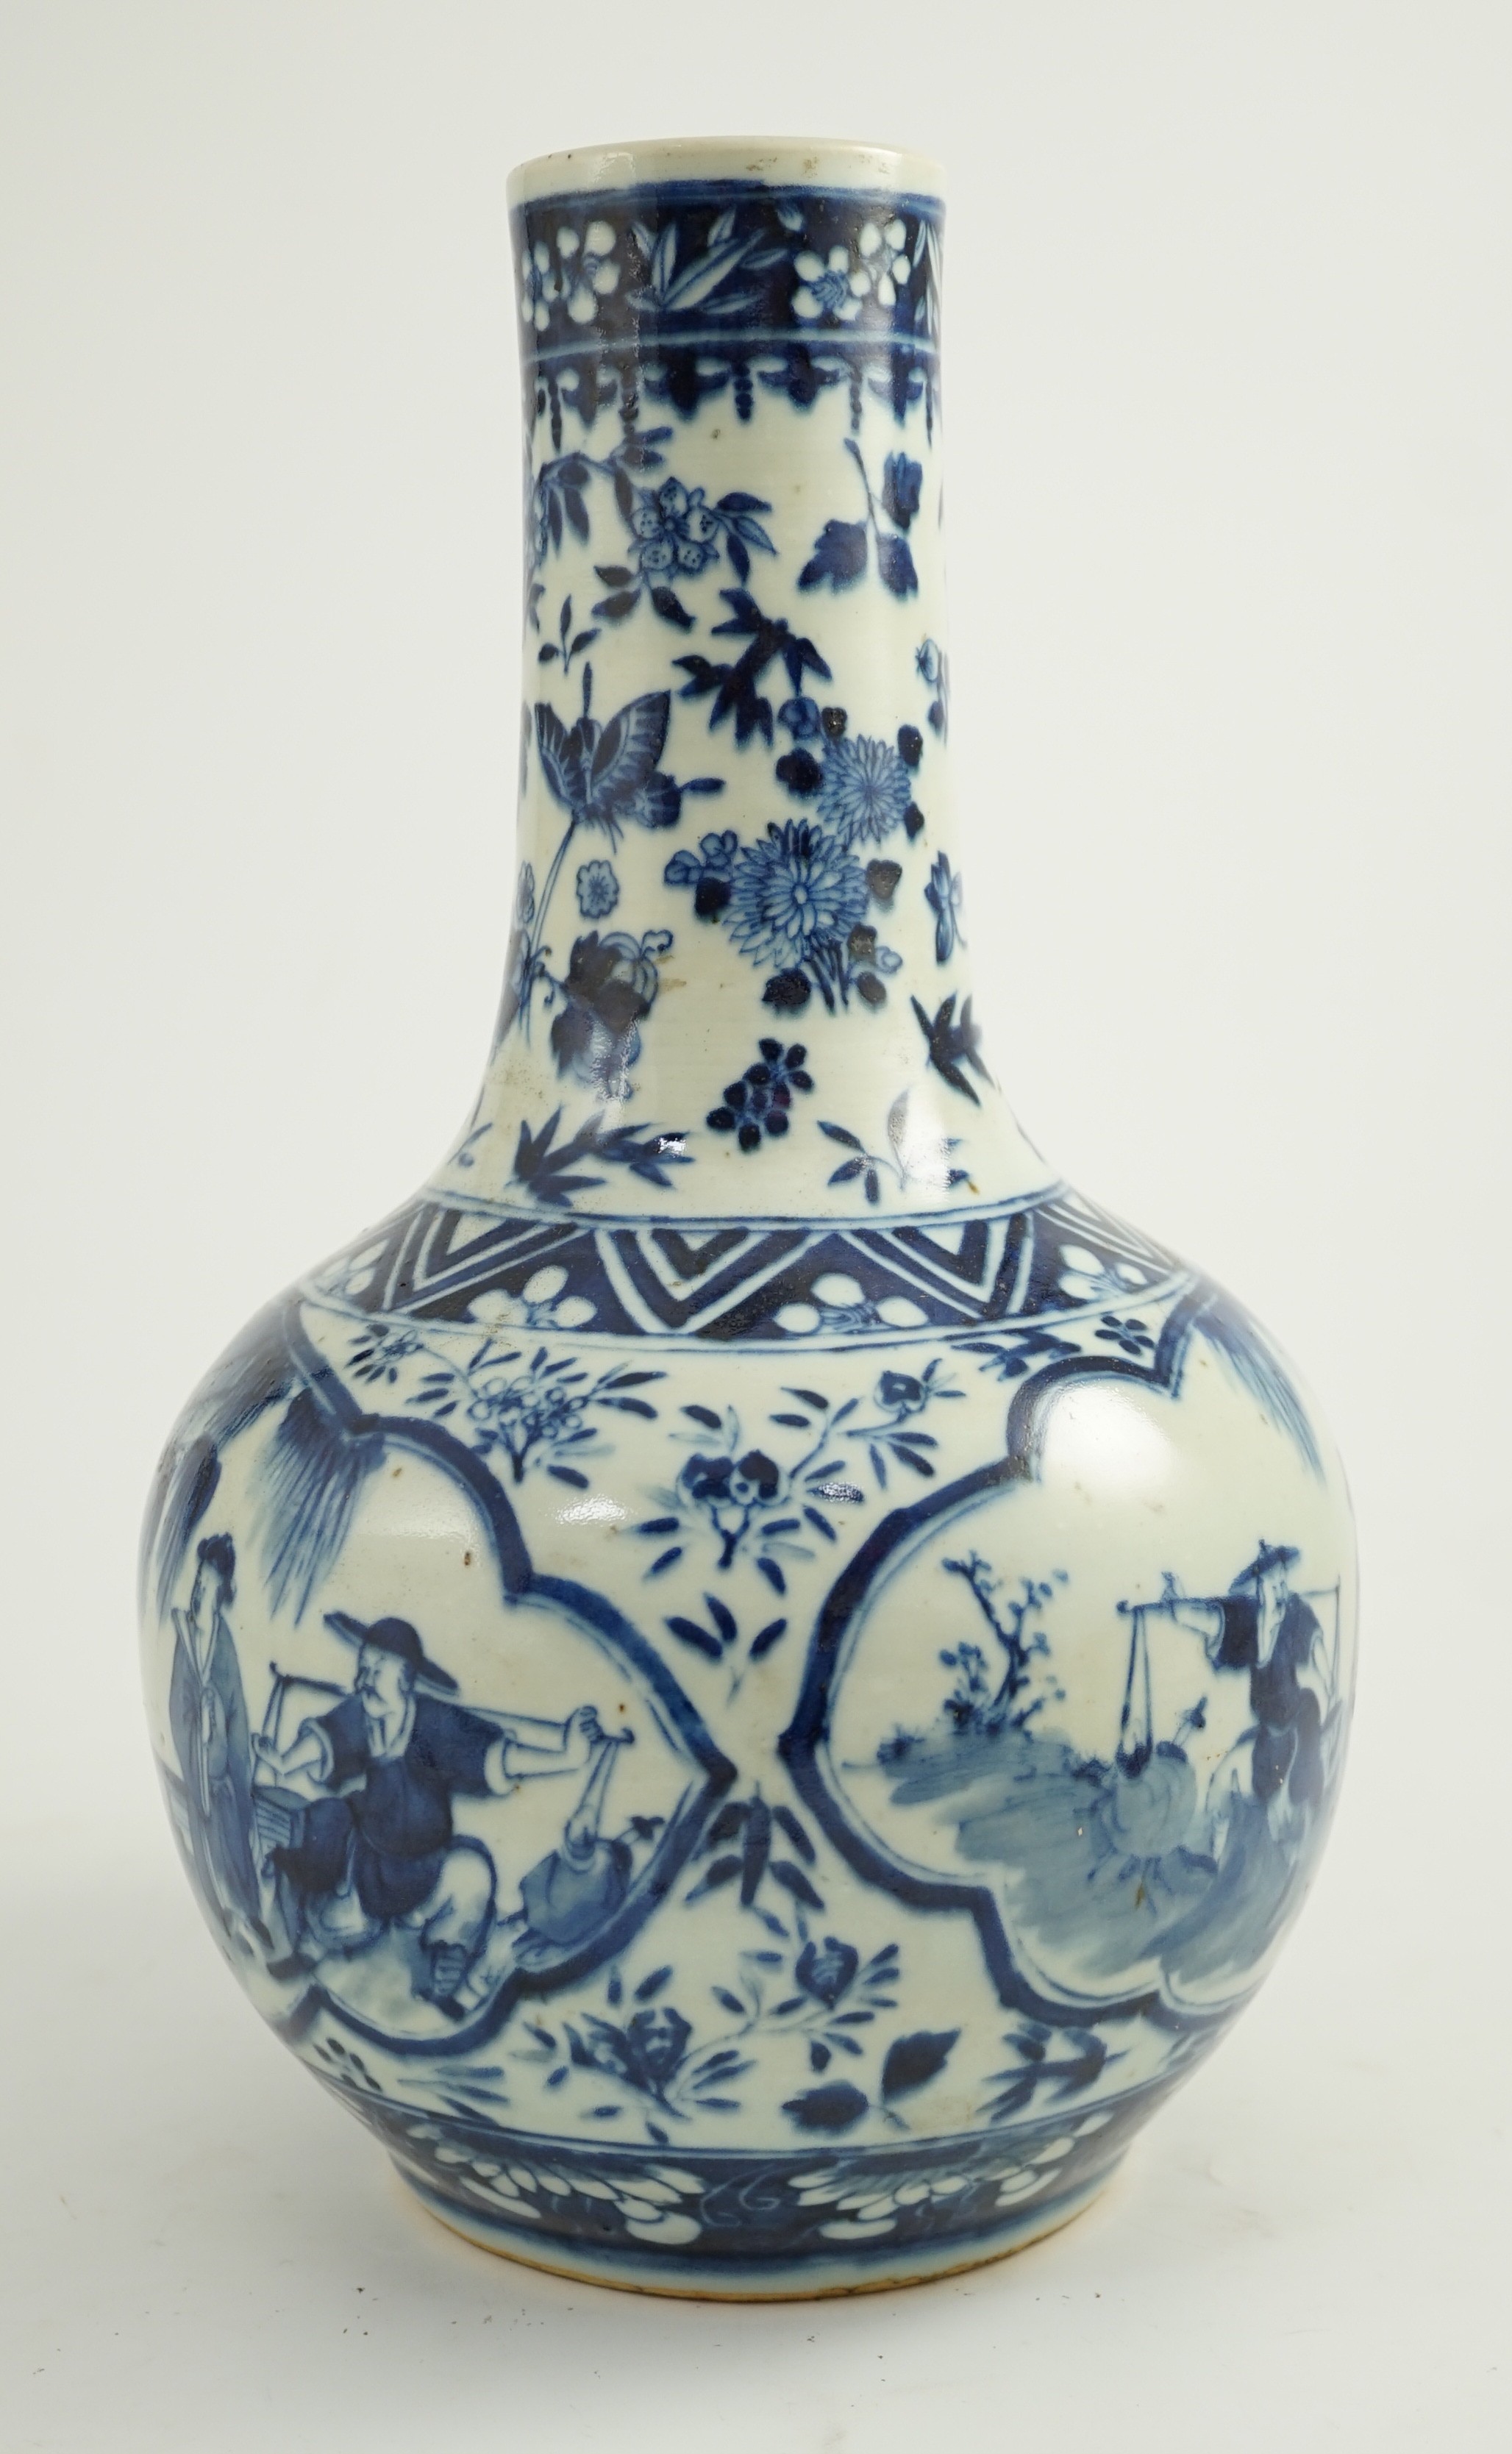 A Chinese blue and white bottle vase, 19th century, 35cm high